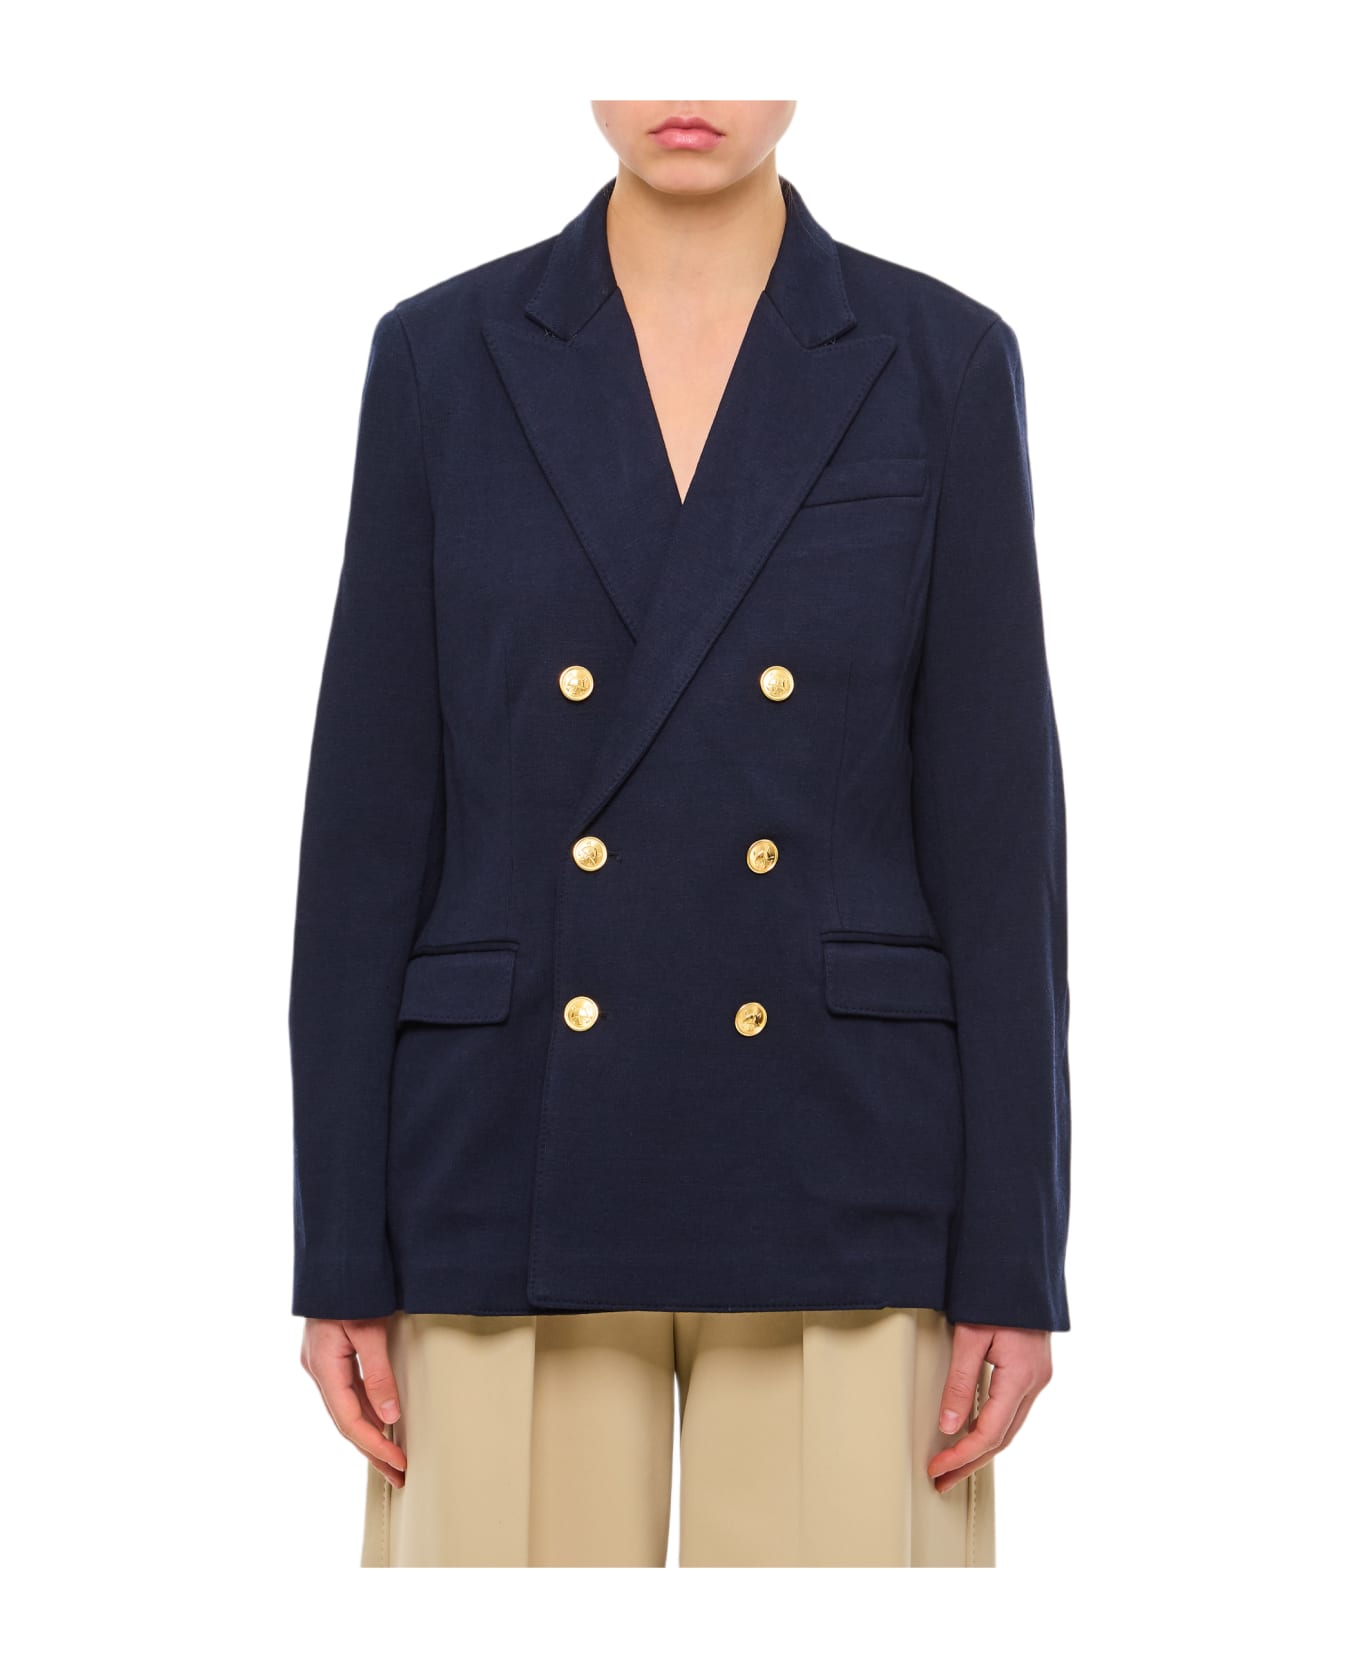 Polo Ralph Lauren Double Breasted Jersey Blazer - Blue ブレザー